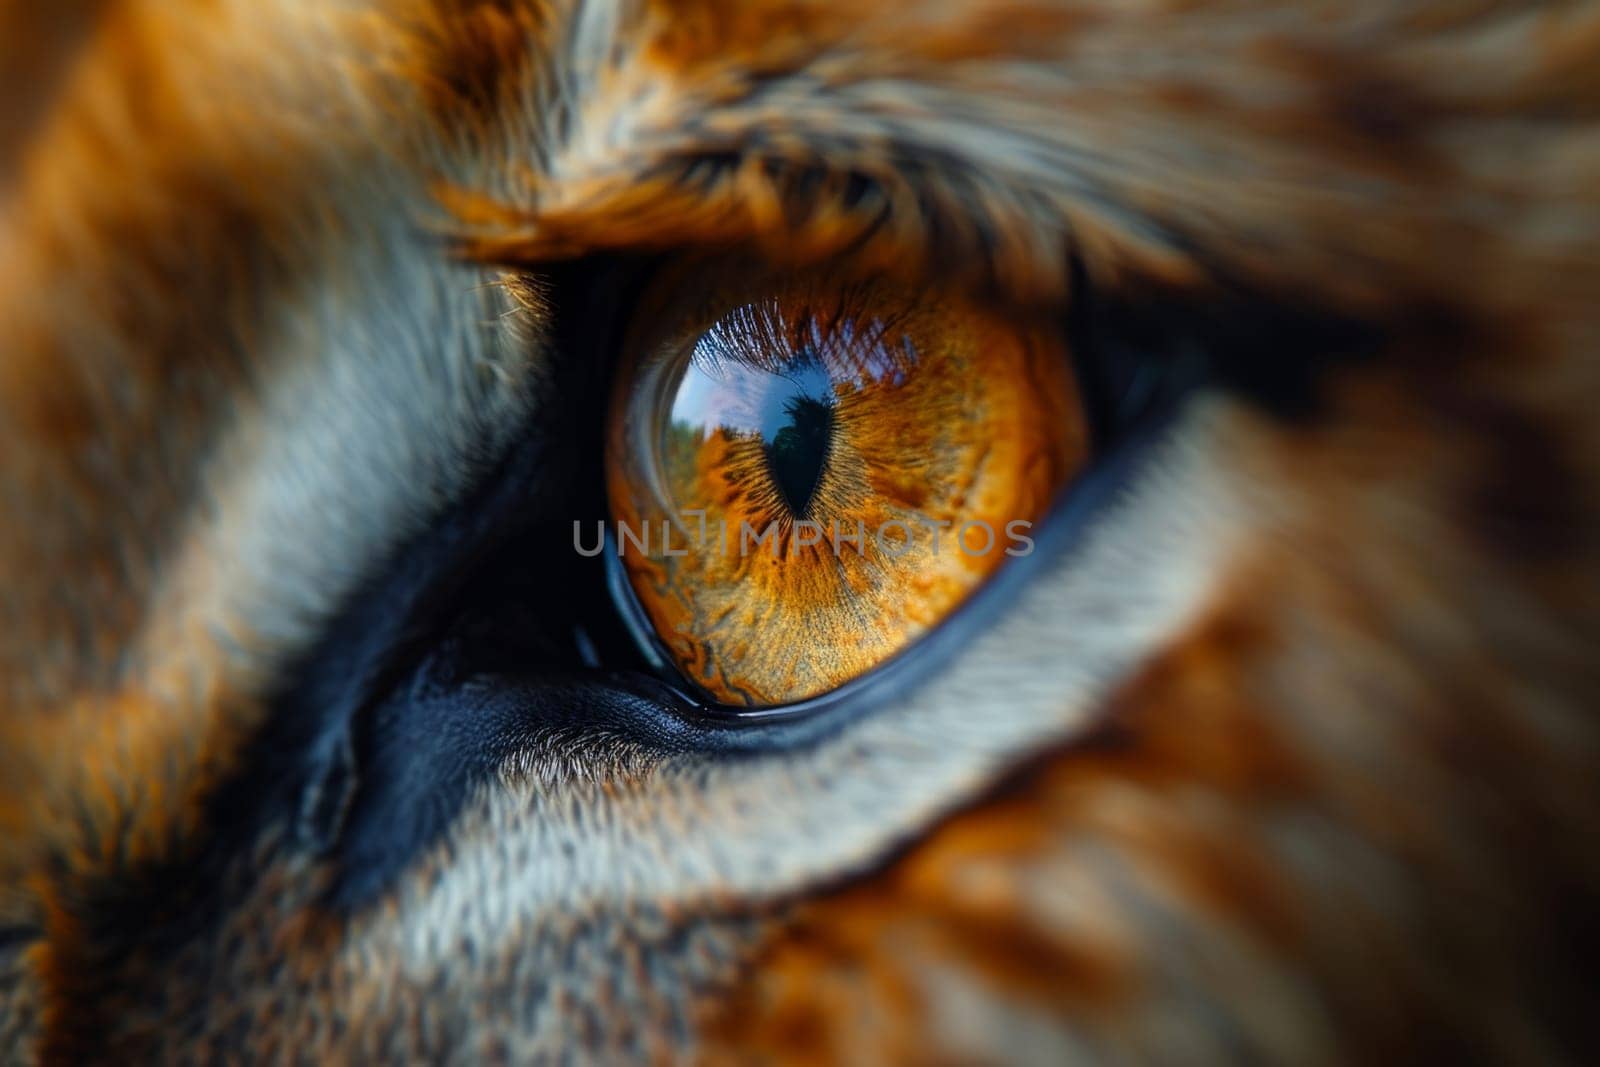 Close-up of a young lioness's face and eyes.